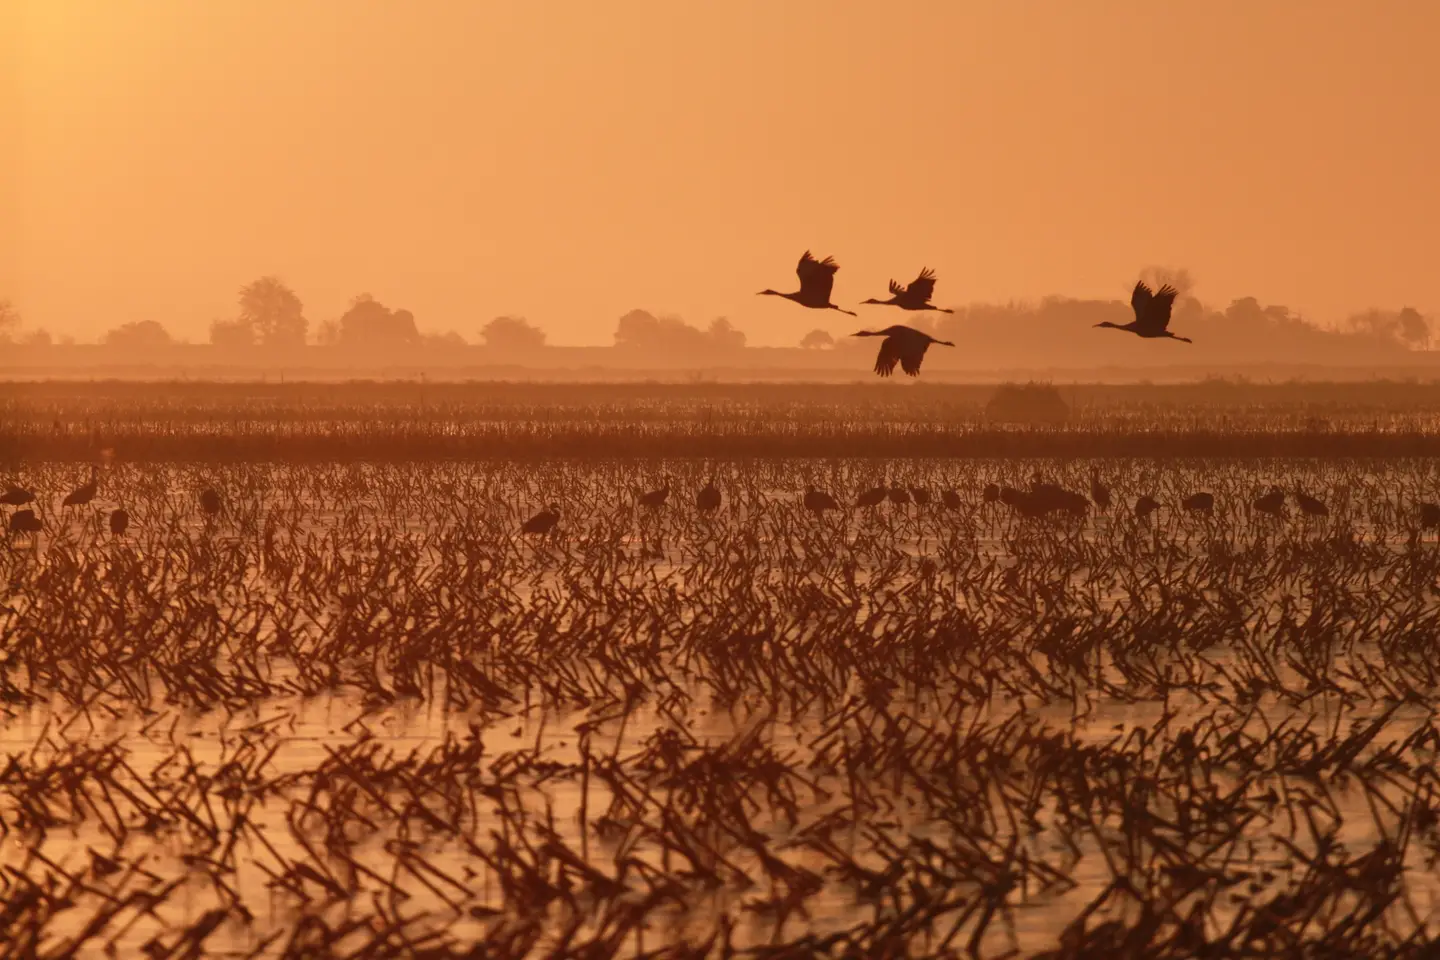 A photo of cranes flying over the land in the sunset.